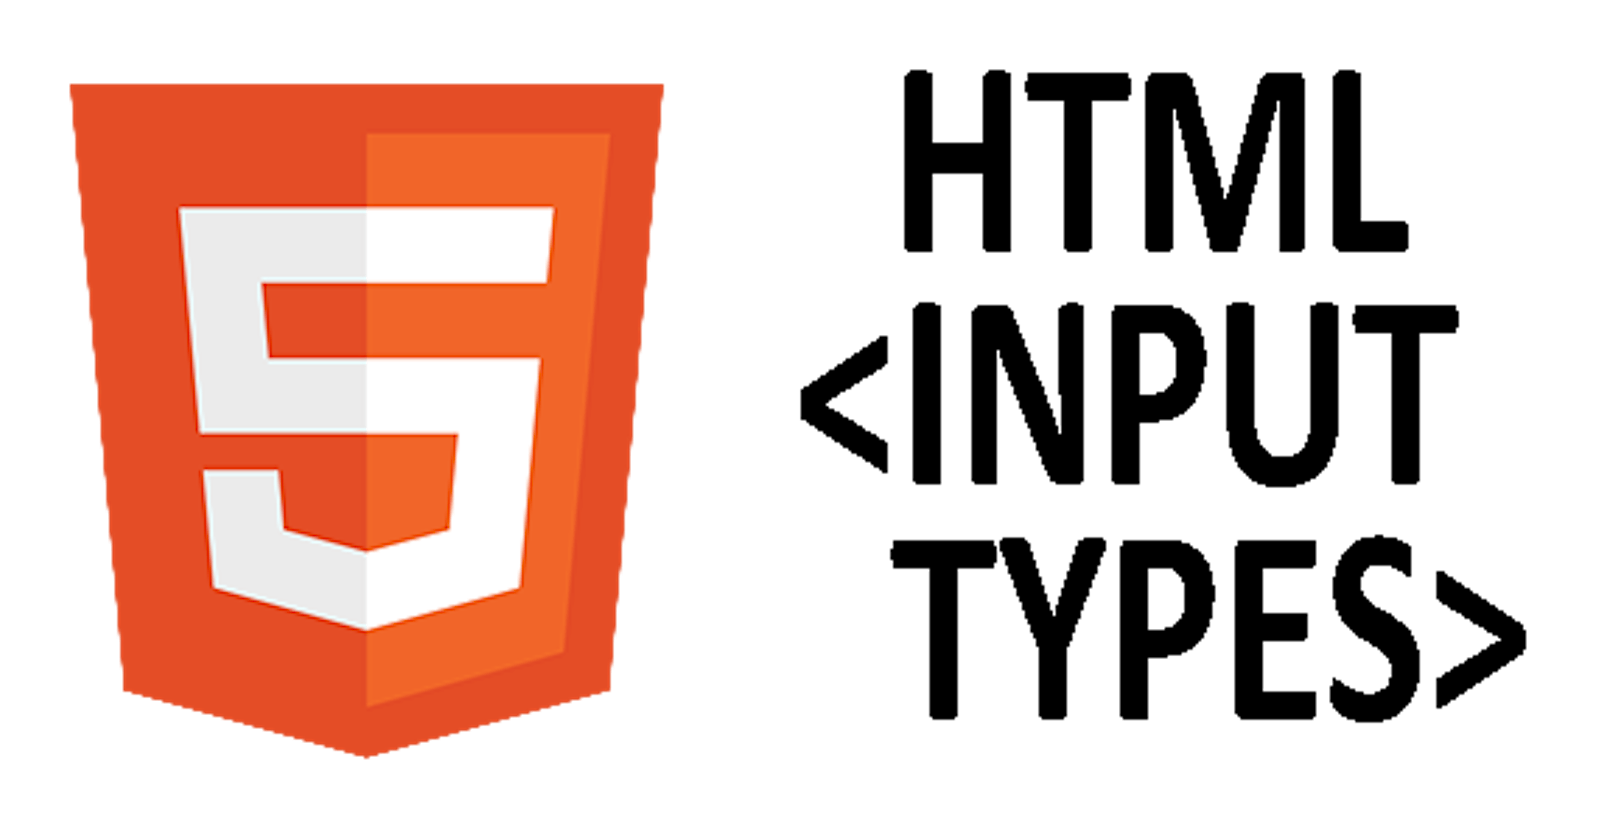 Input Element in HTML